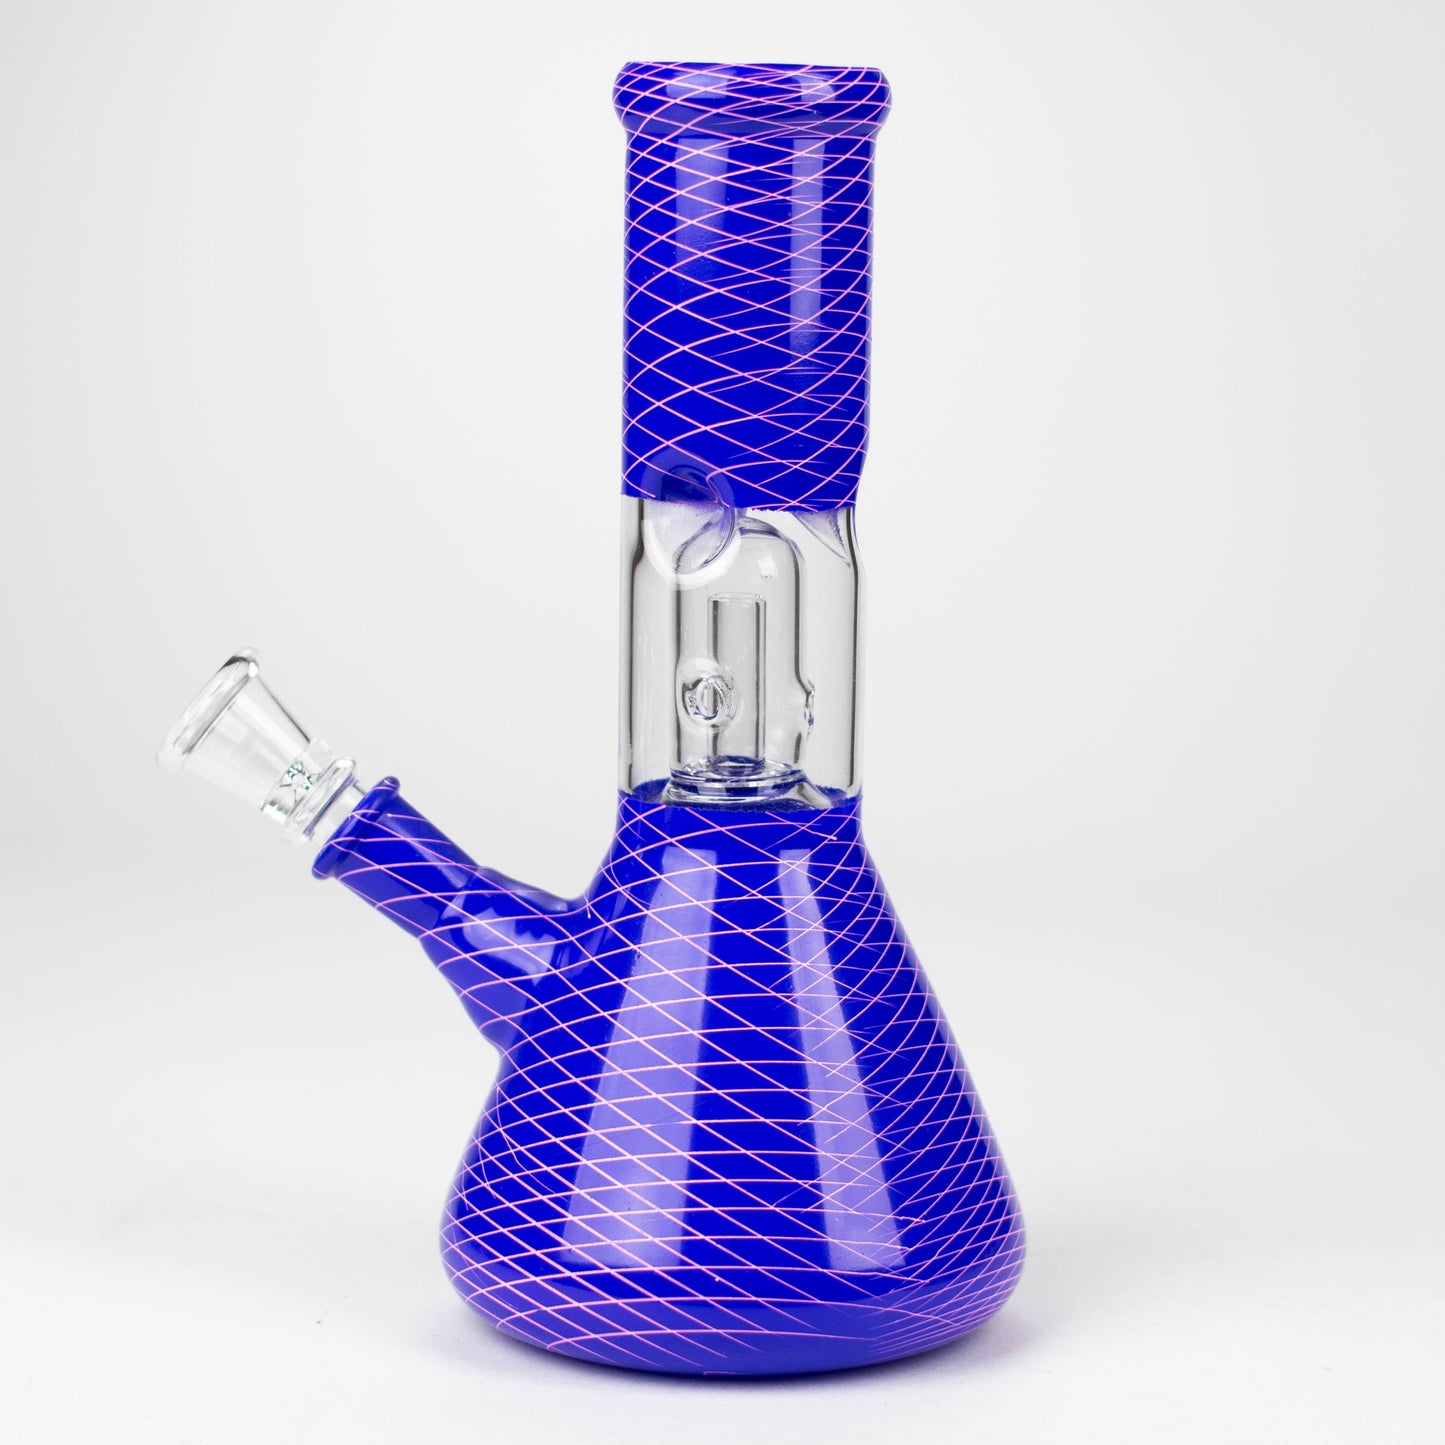 8" Water pipe with Percolator_7